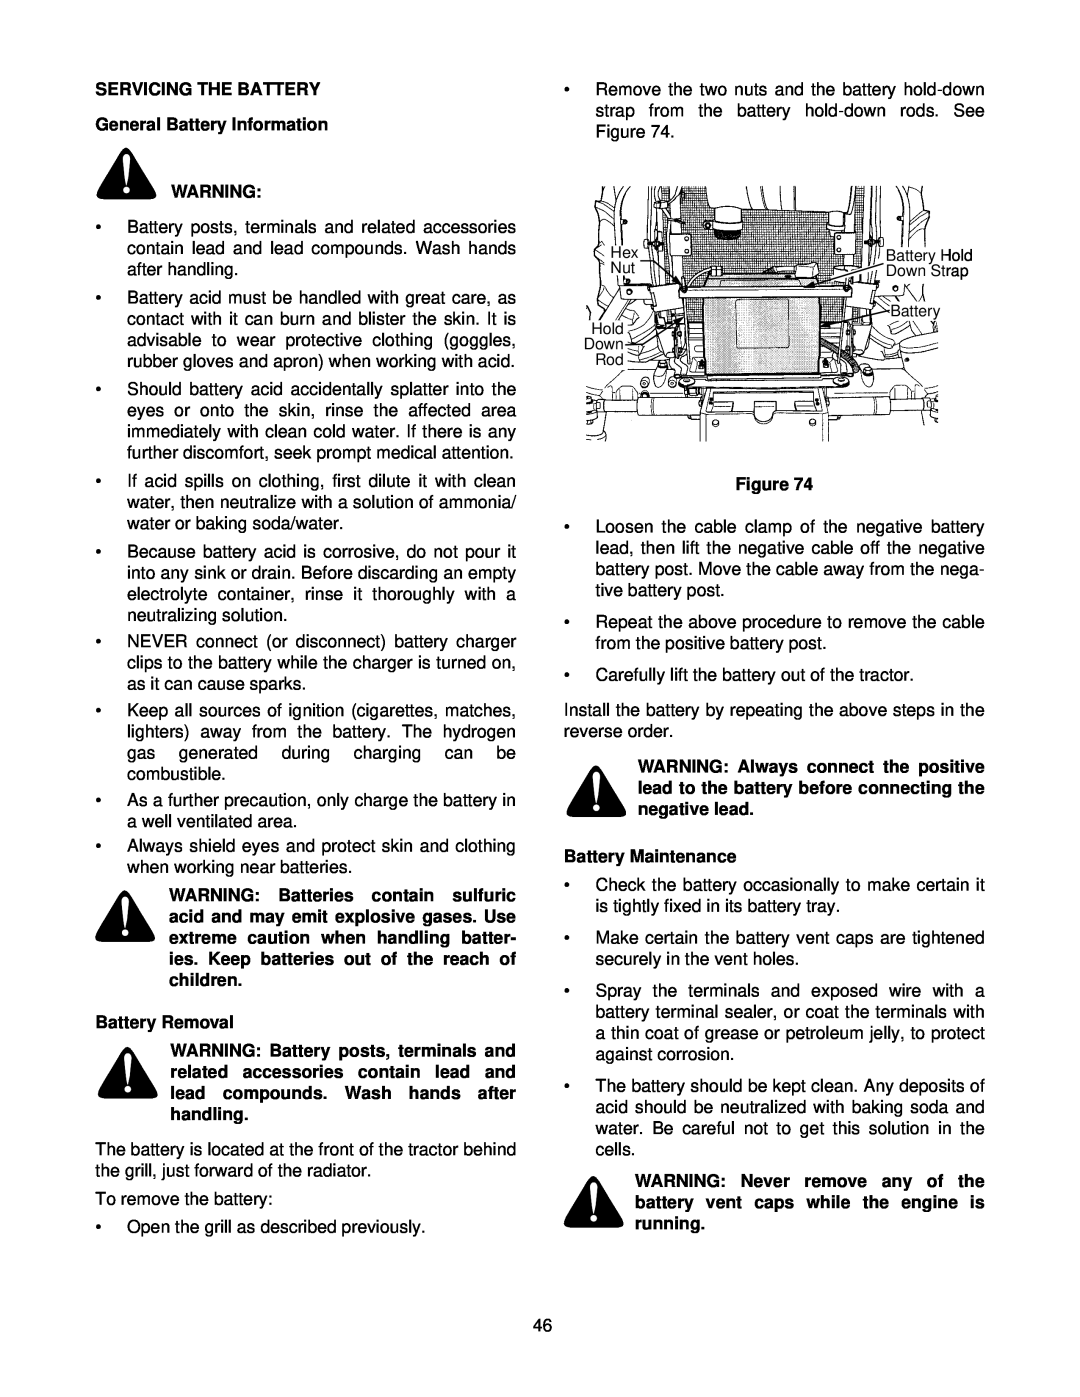 Cub Cadet 8354 manual SERVICING THE BATTERY General Battery Information, Battery Removal, Figure, Battery Maintenance 